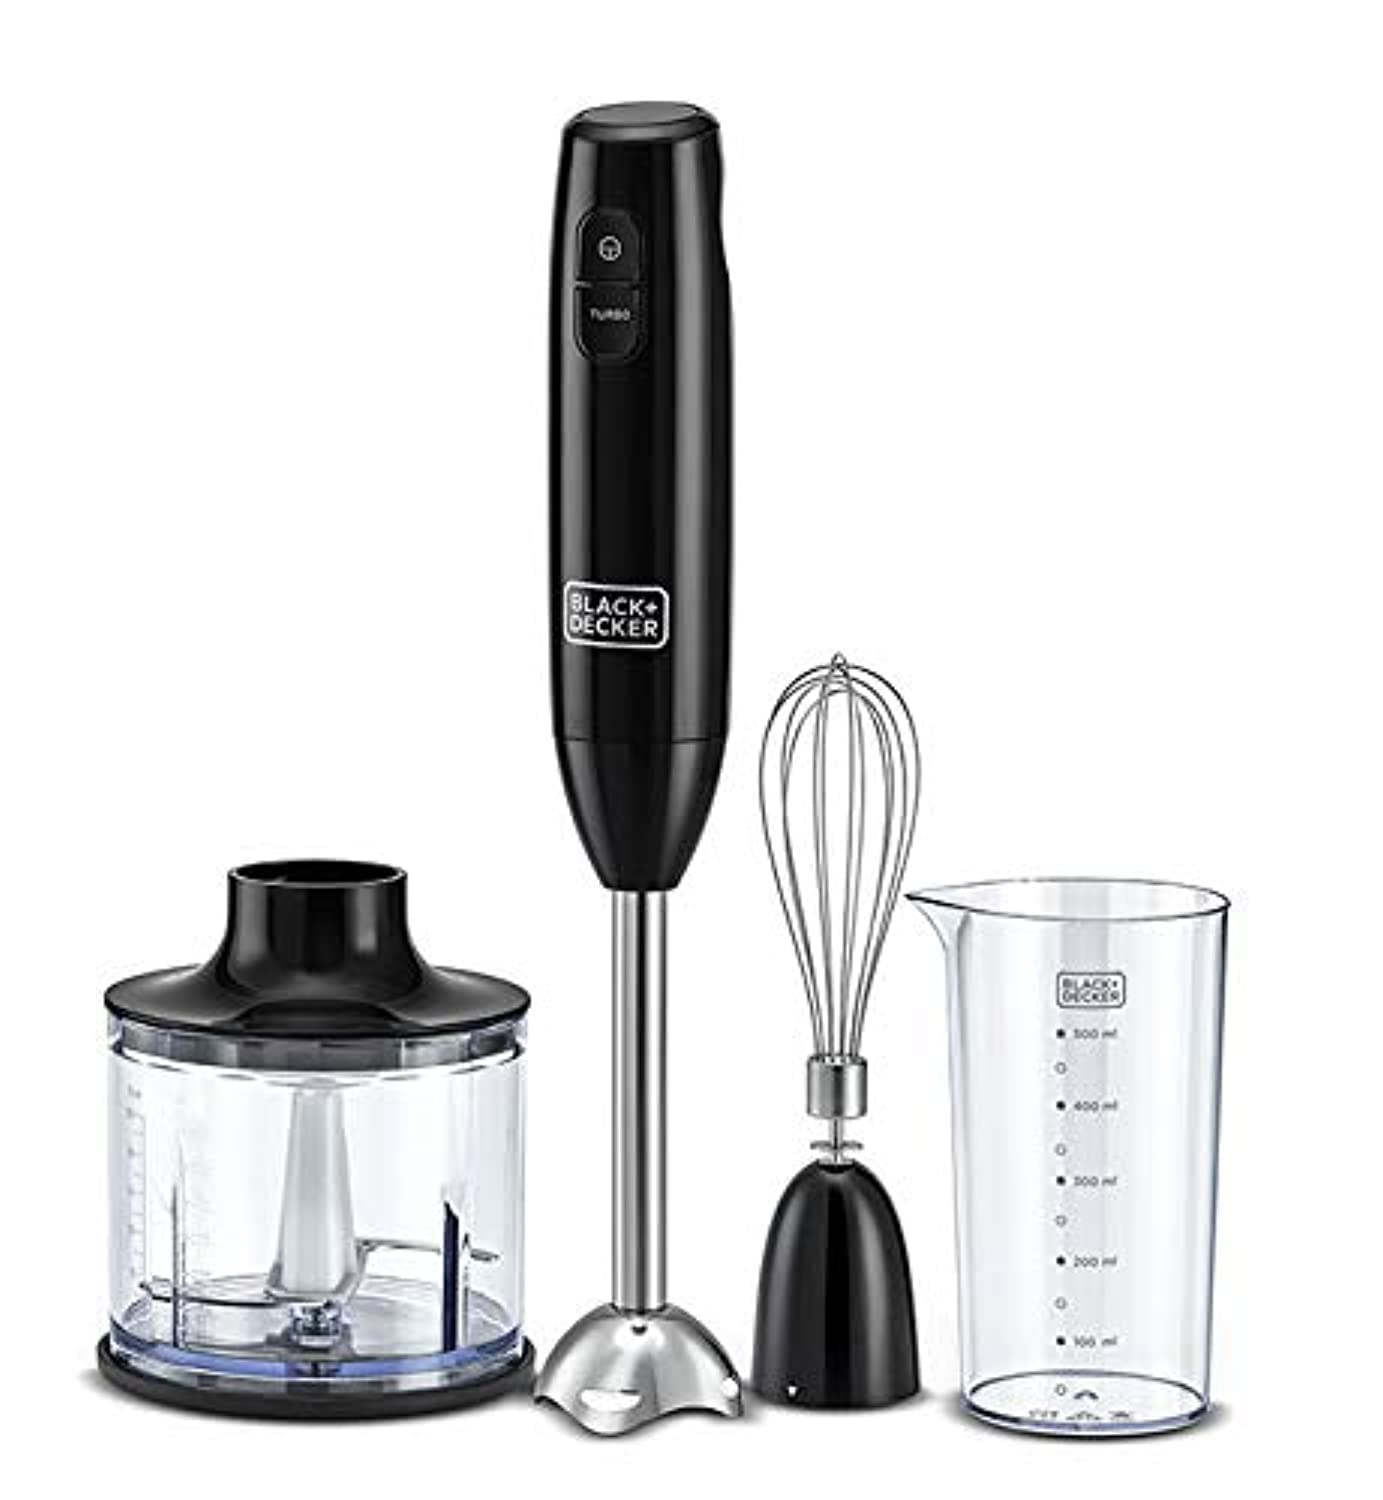 Black & Decker 600W 600ml Hand Blender With Chopper Chopping Bowl, Stainless Steel Blades, 500ml Beaker, 2 Speed Buttons and 3in1 Functionality, For Blending/Chopping/Whisking HB600-B5